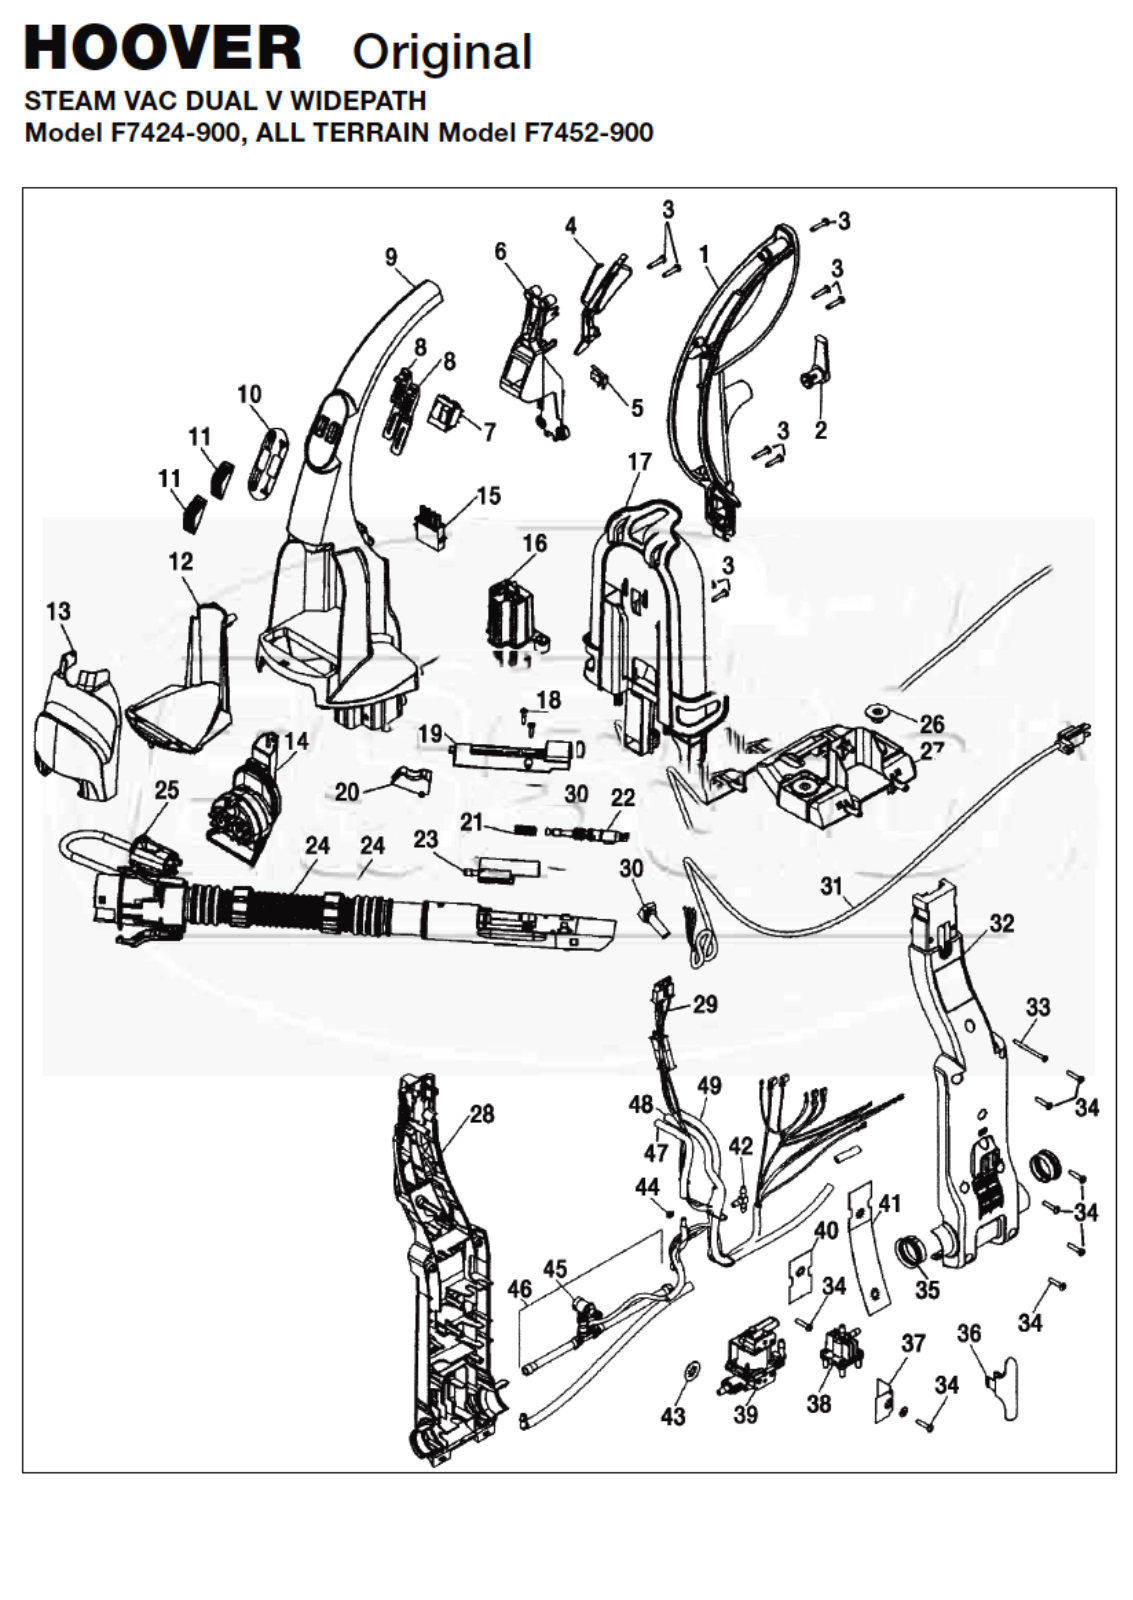 Hoover F7452-900 Owner's Manual